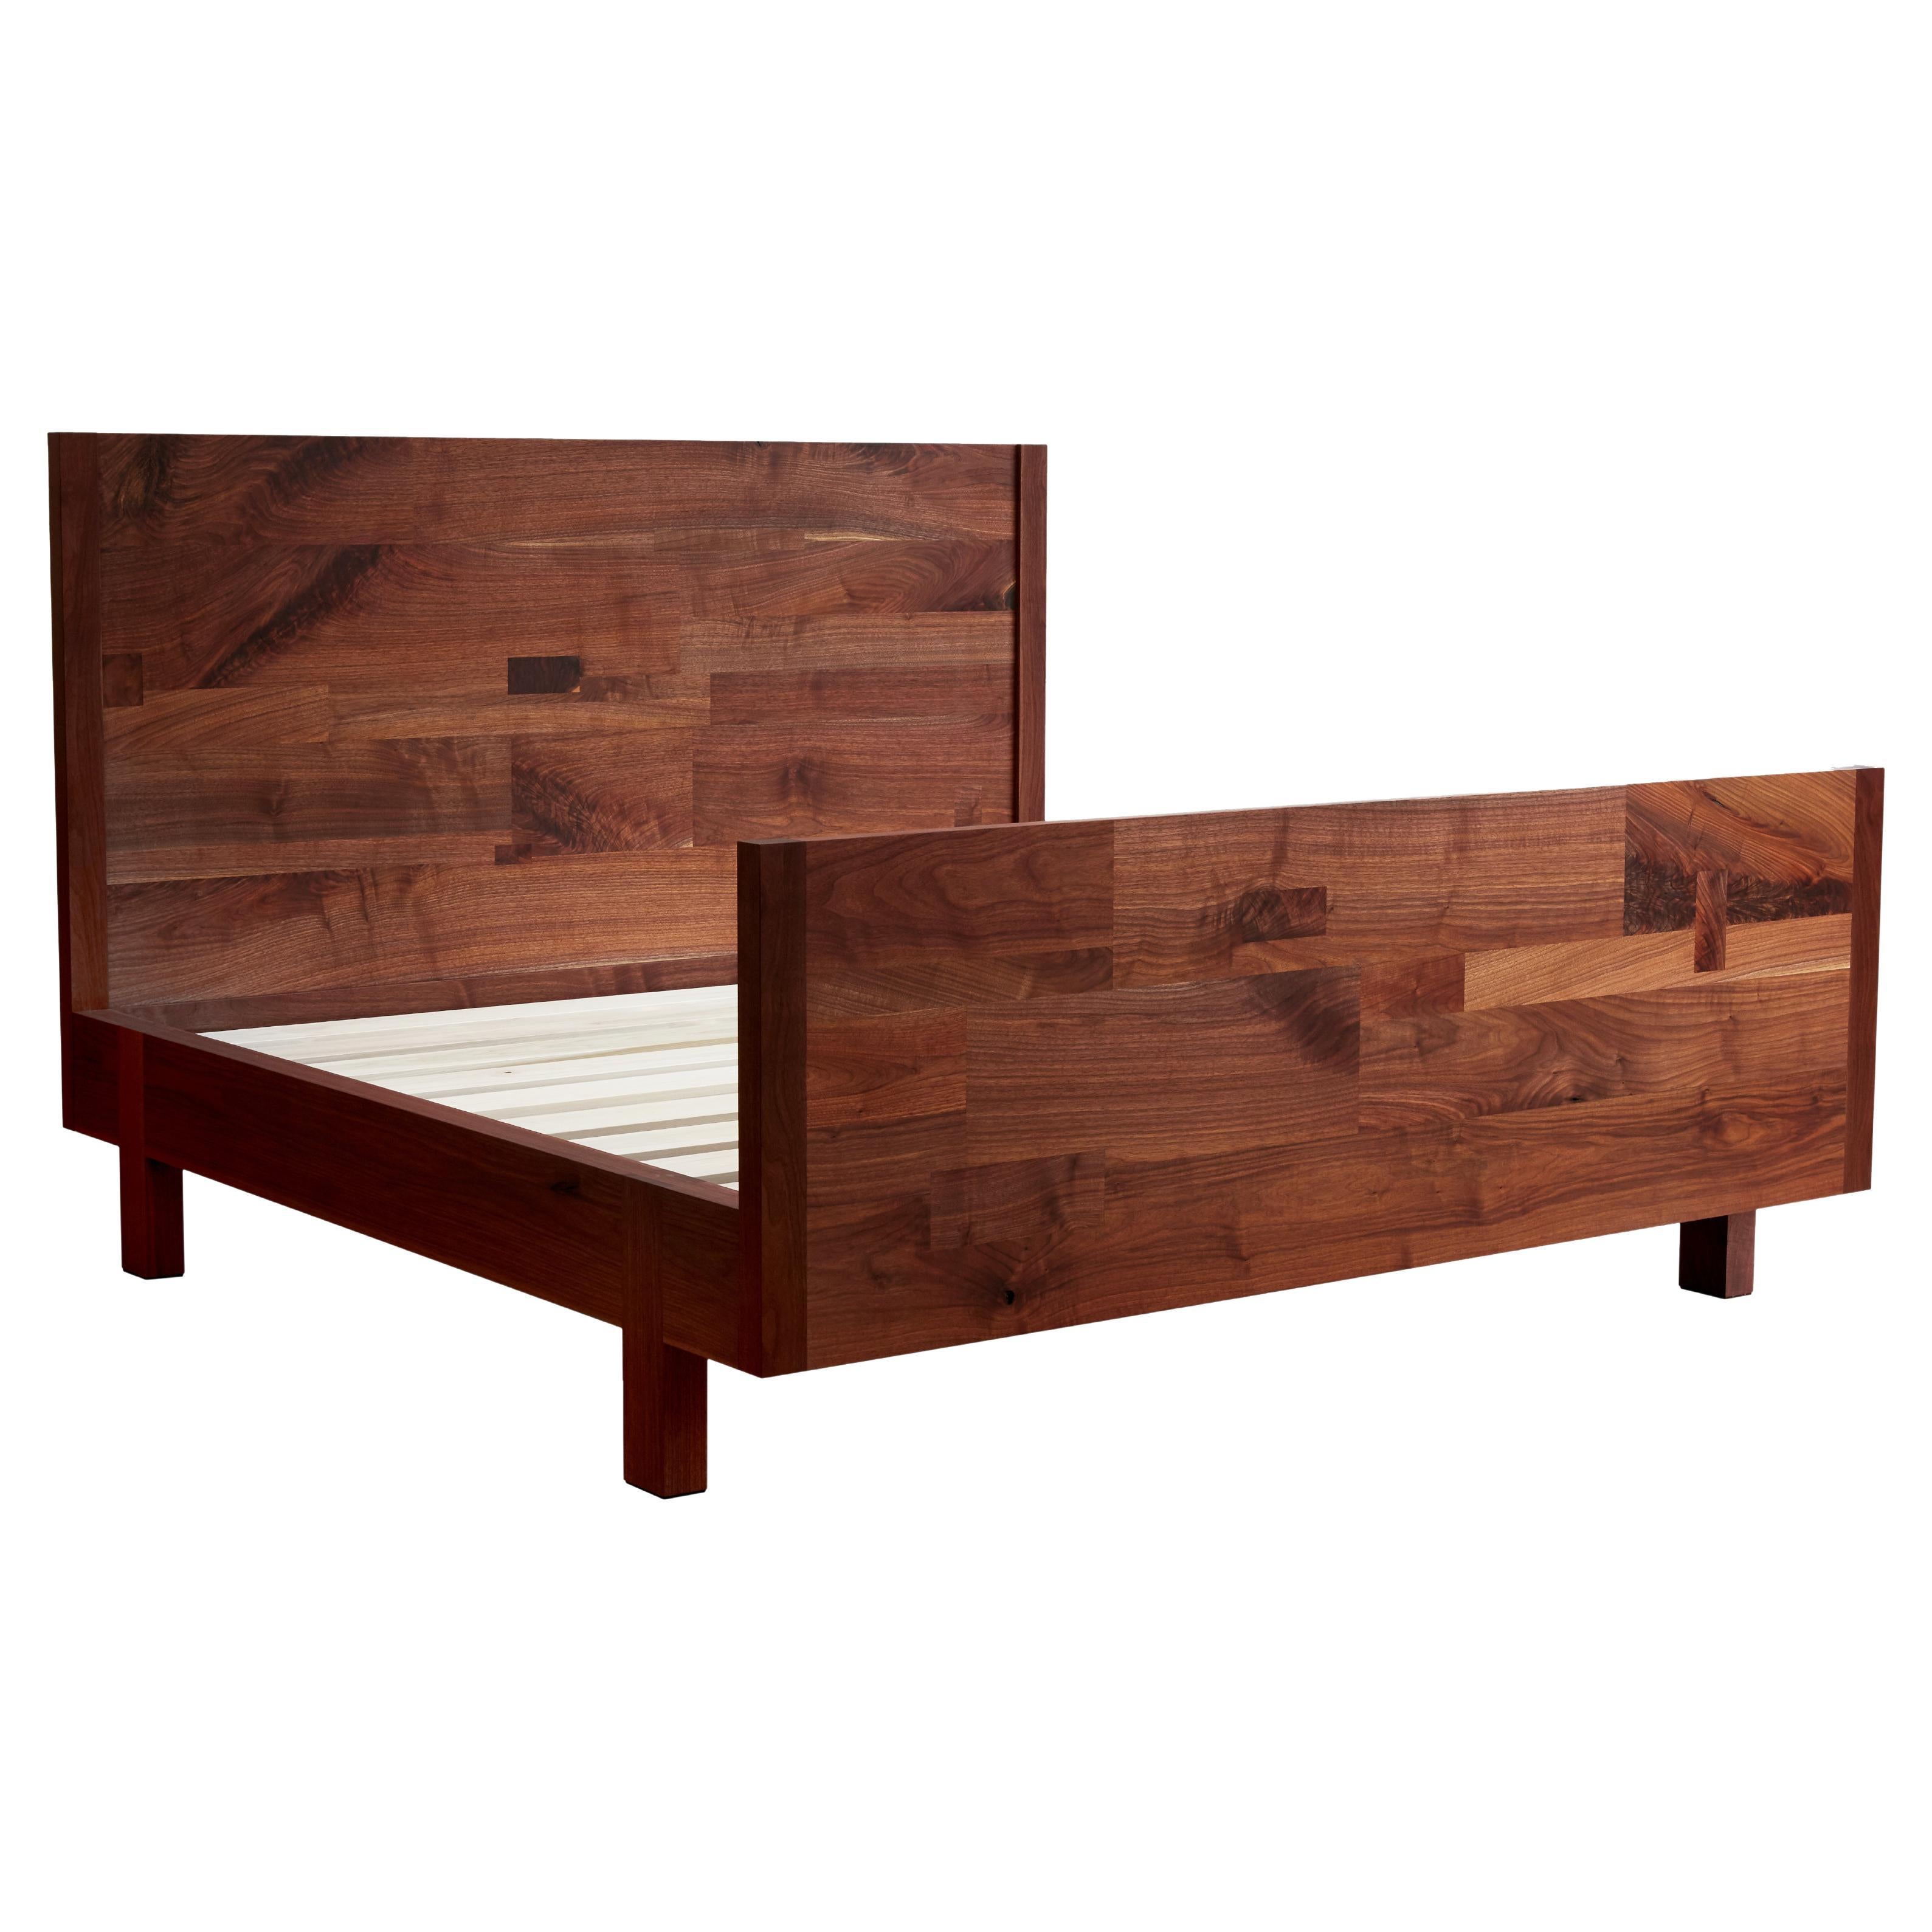 Black Walnut Clove Bed King-Sized with Solid Wood Headboard & Footboard For Sale